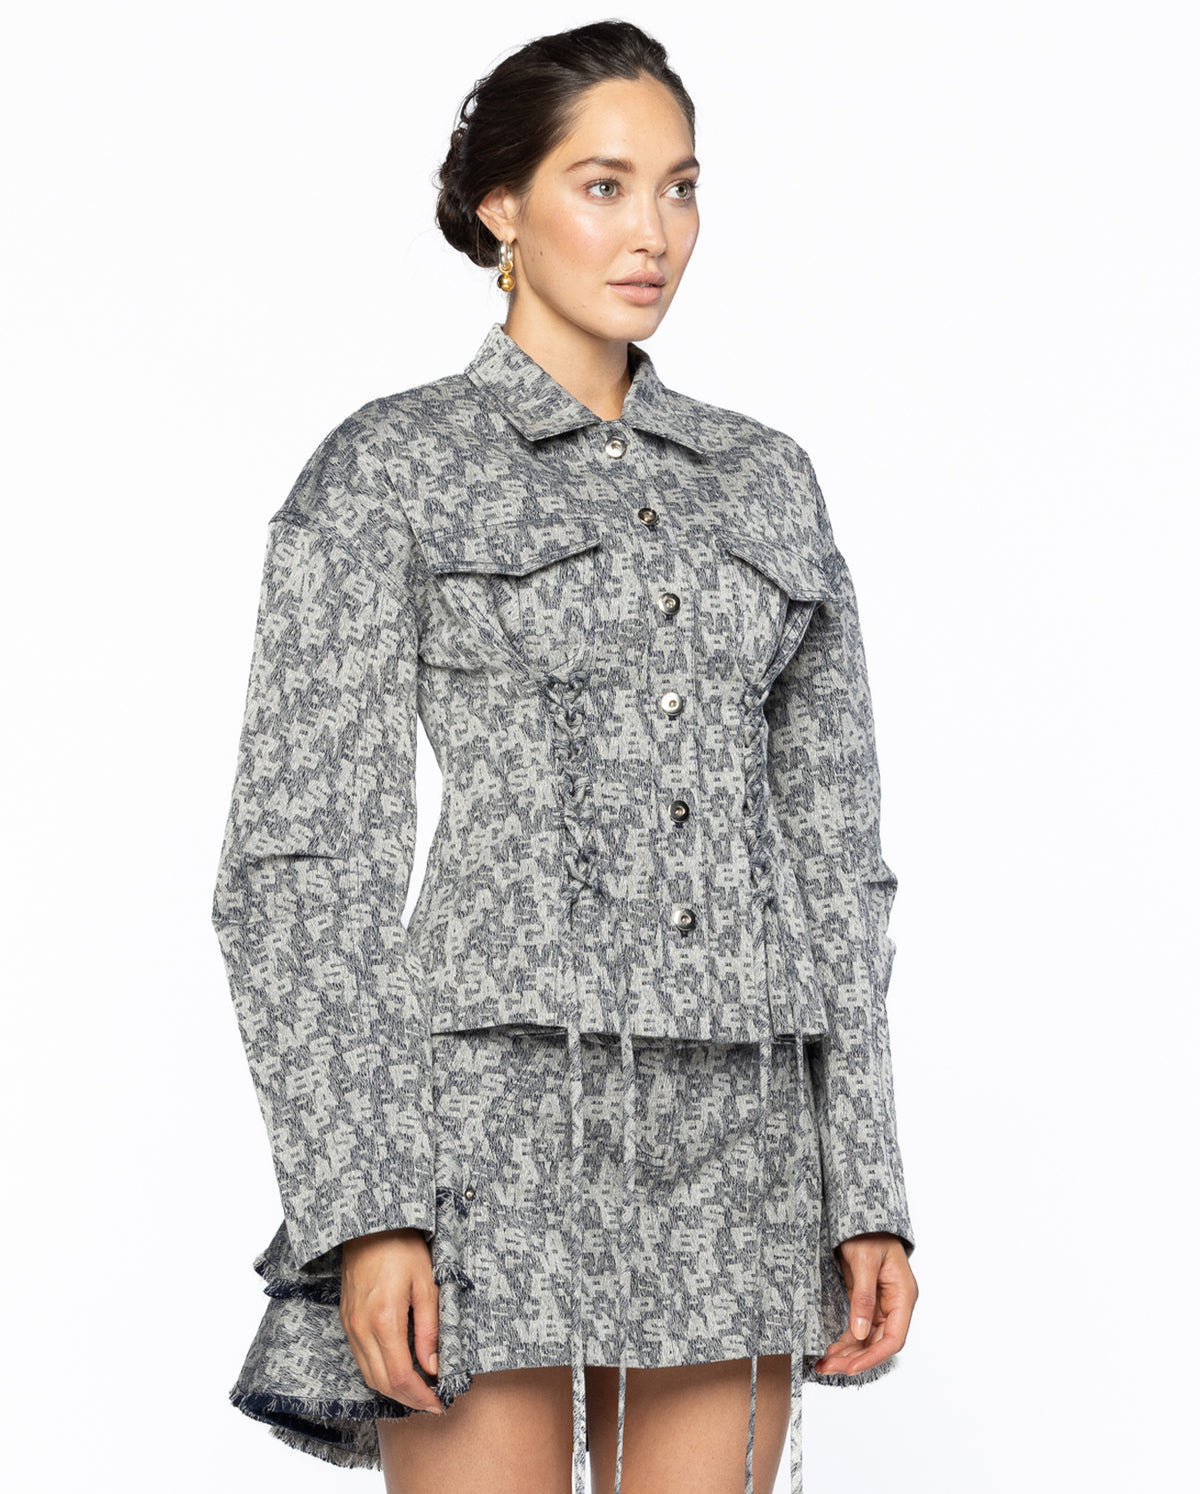 PV Jacquard Laced Cocoon Jacket